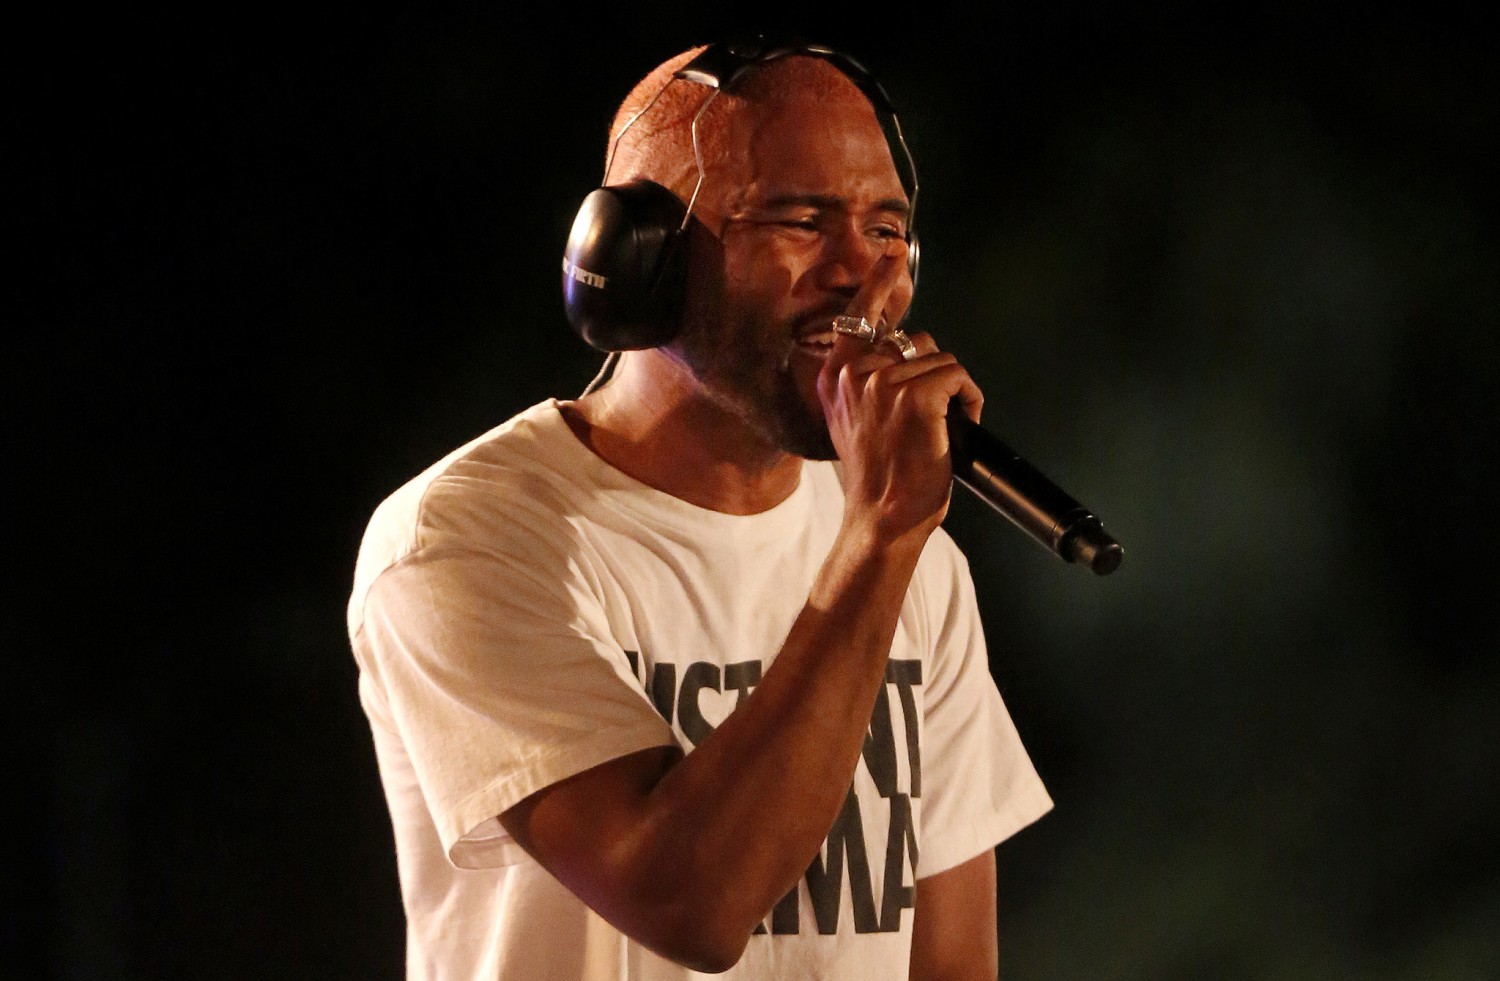 Frank Ocean sings while holding a microphone to his mouth and wearing headphones.